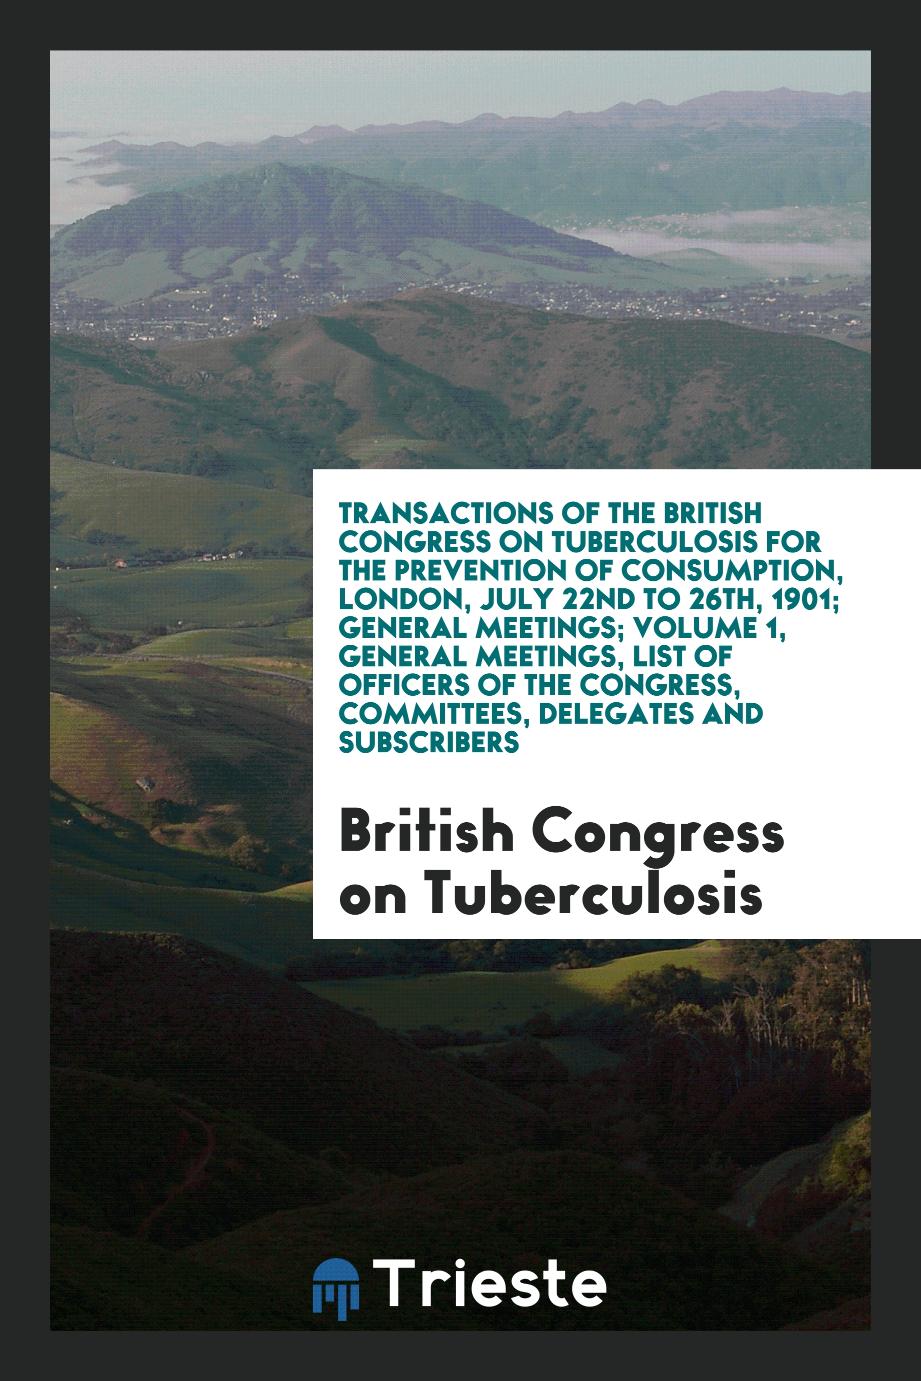 Transactions of the British Congress on Tuberculosis for the Prevention of Consumption, London, July 22nd to 26th, 1901; General Meetings; Volume 1, General Meetings, List of Officers of the Congress, Committees, Delegates and Subscribers